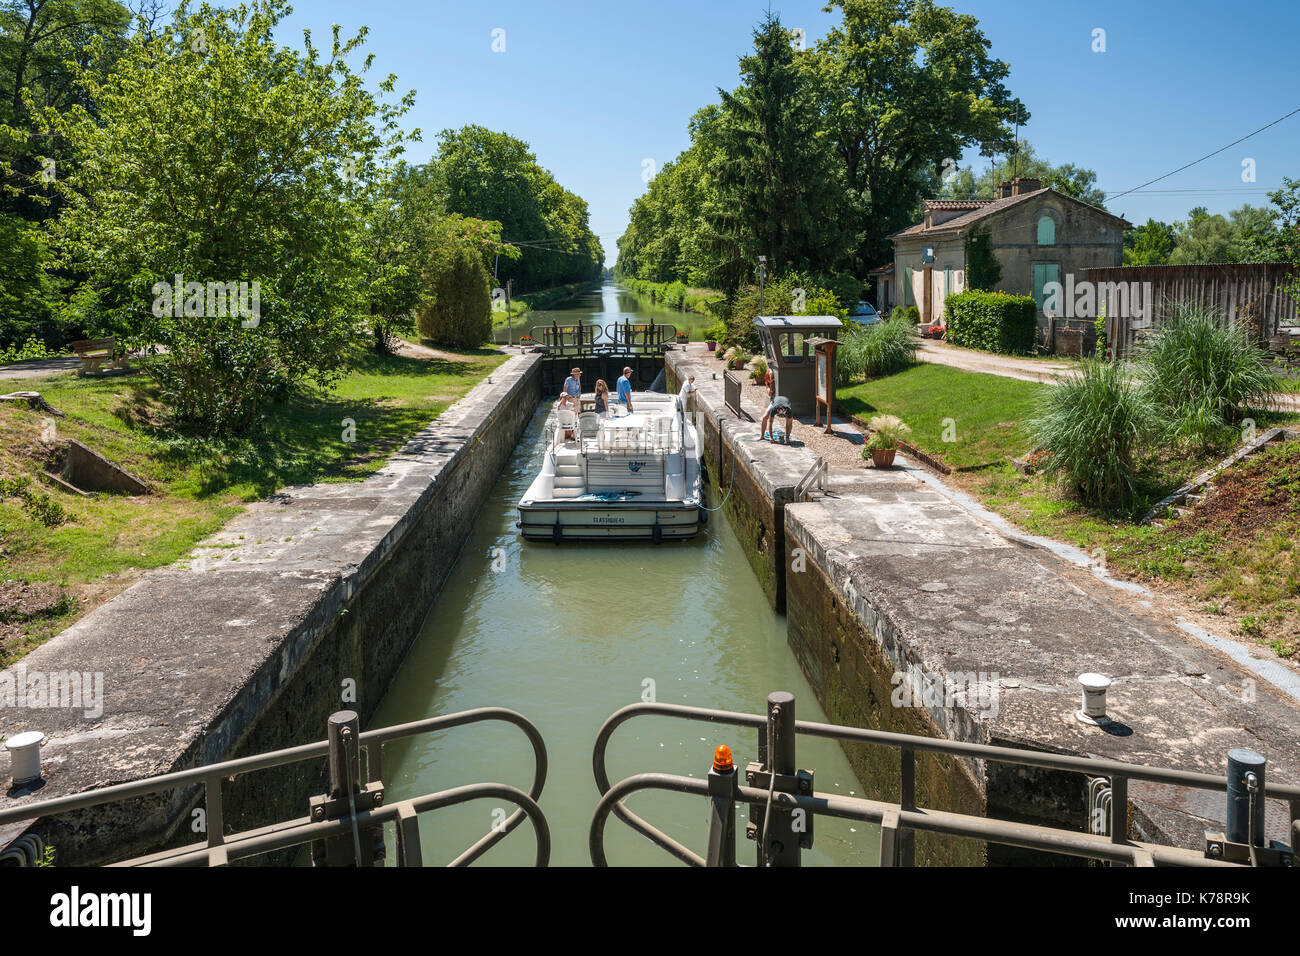 Canal boat navigating a lock on the canal latéral à la Garonne in the Dordogne region of southwest France. Stock Photo